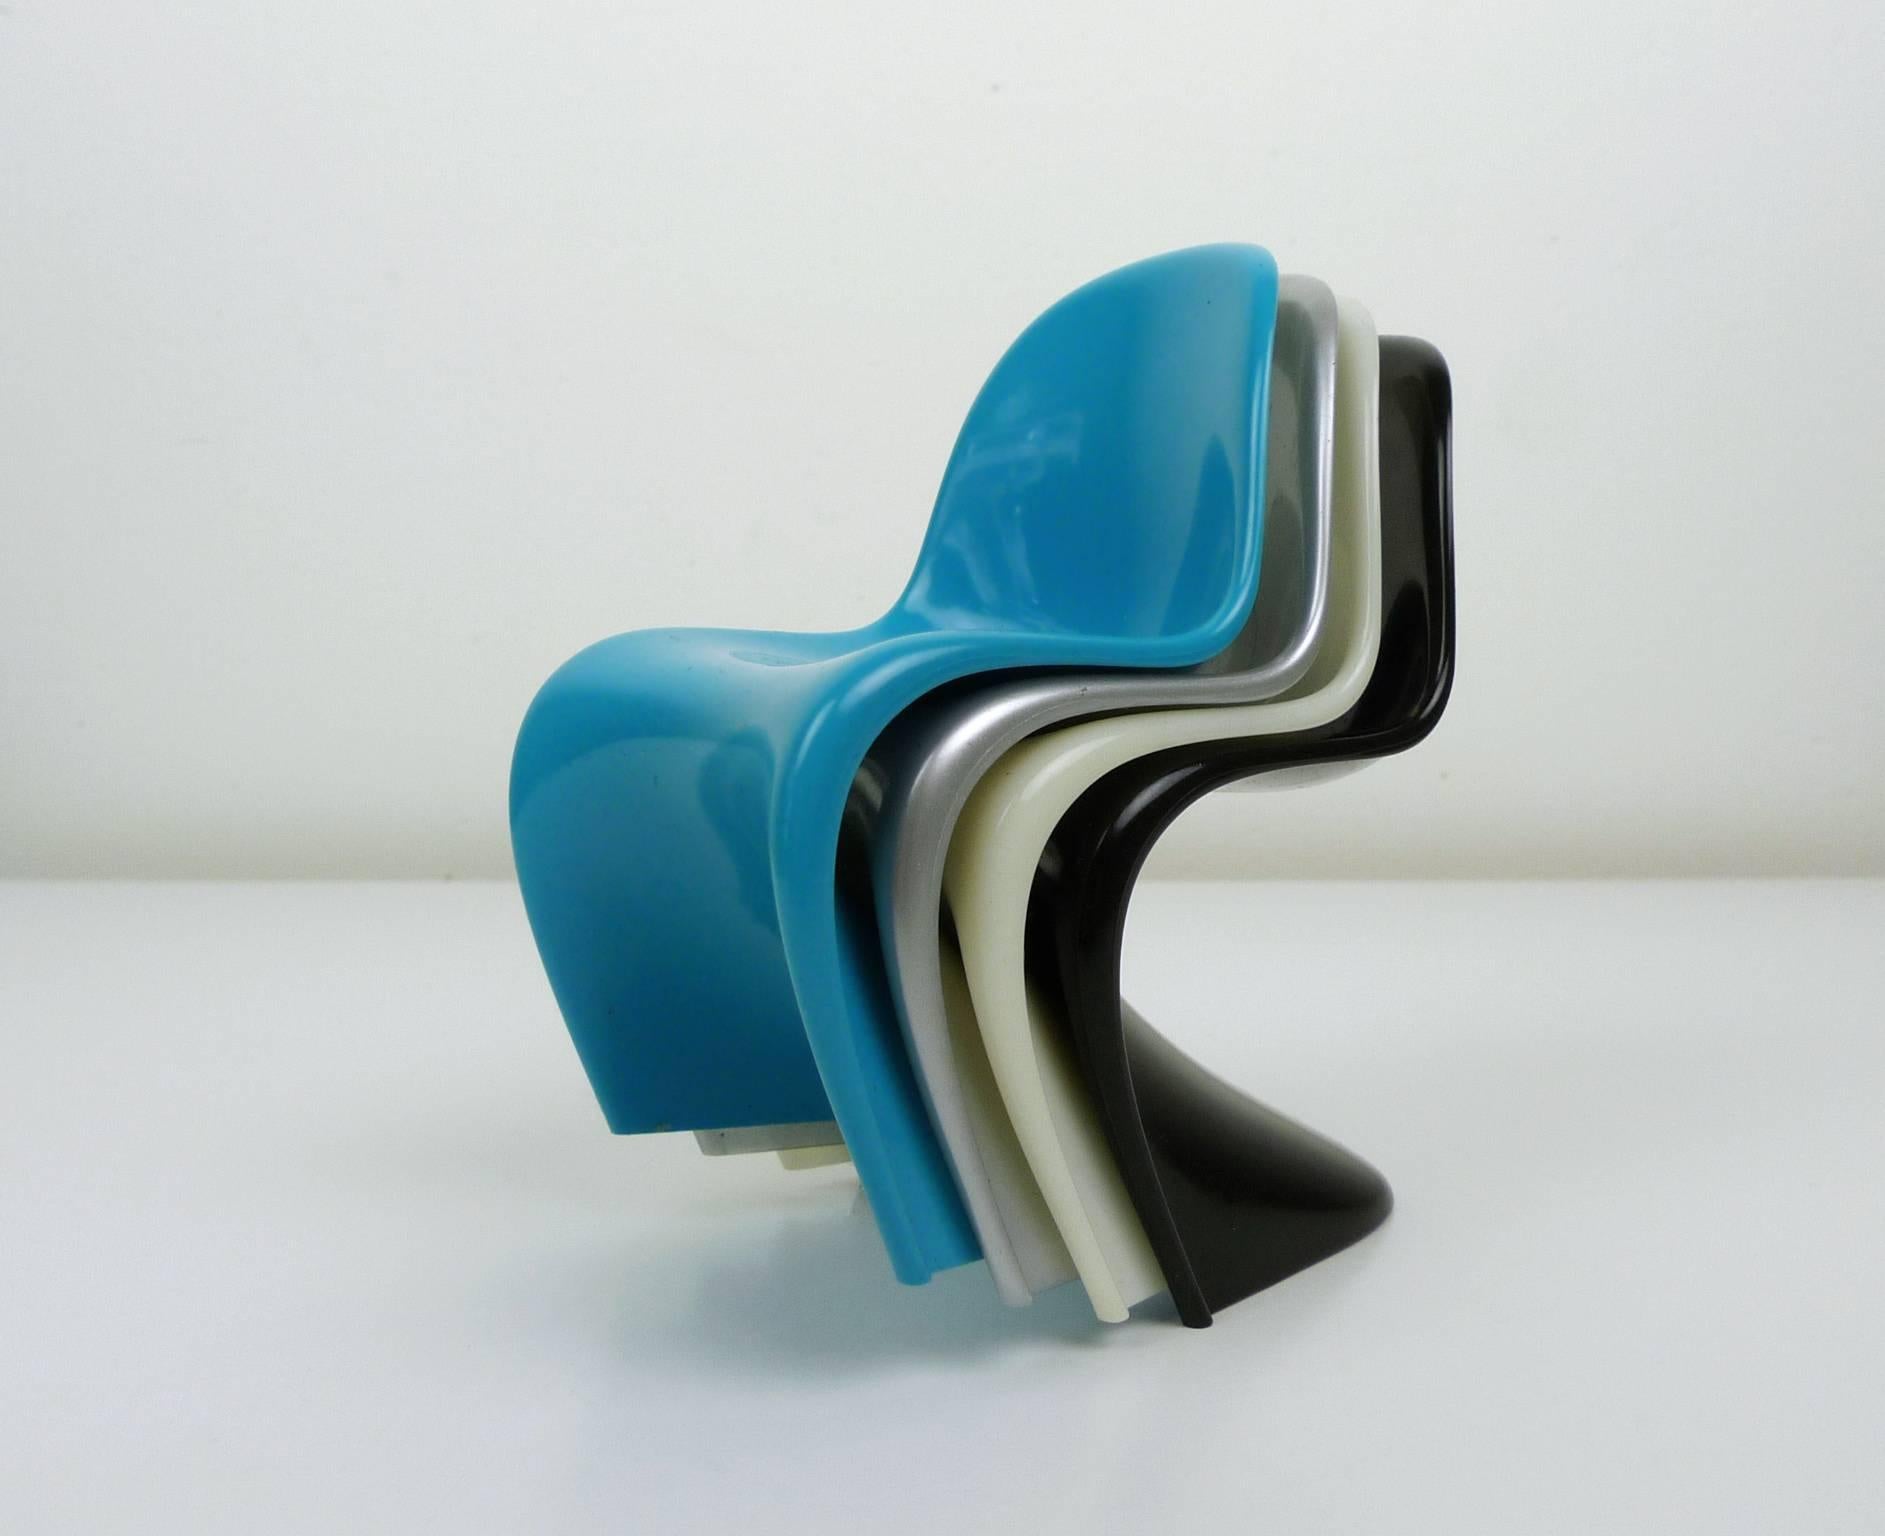 Plastic Set of Four Miniature Panton Chairs from Germany, 1970s For Sale